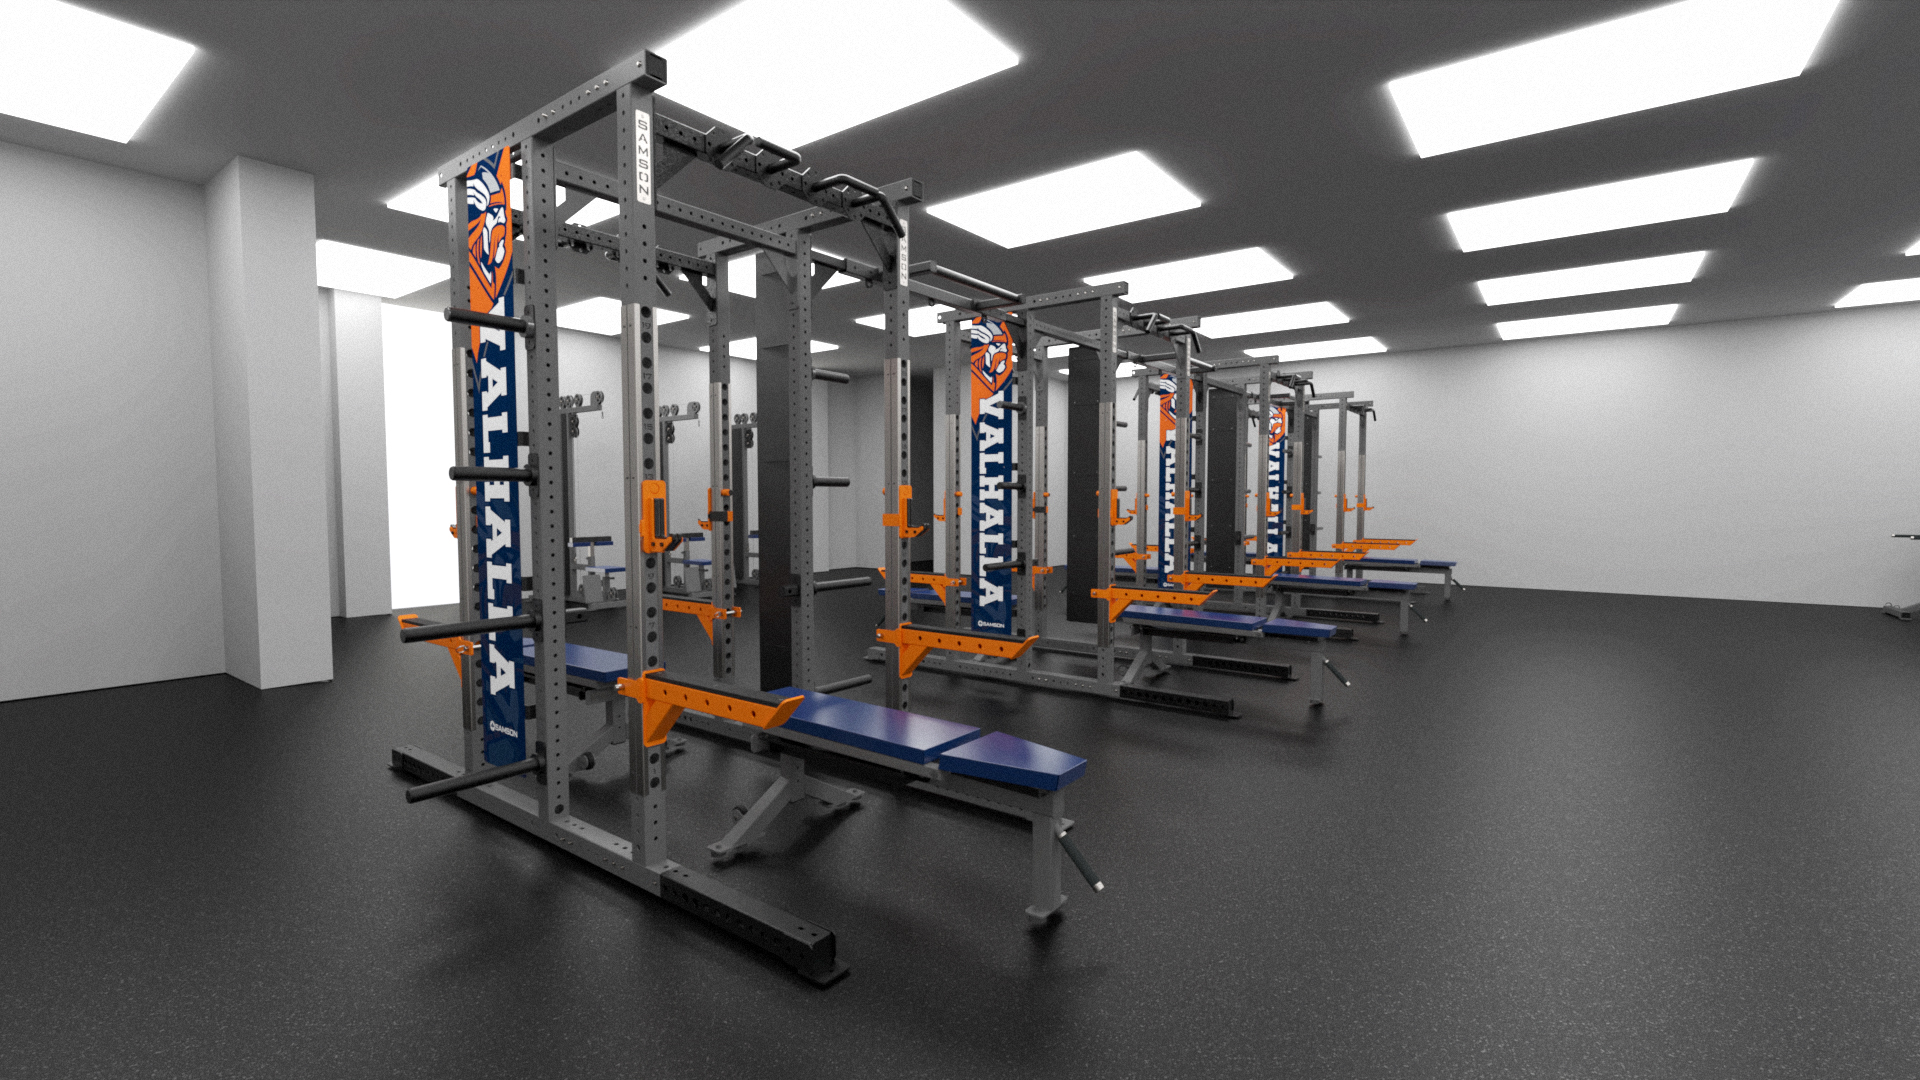 Valhalla Room Camera Camera 3 Visualizing in 3D: Designing a Weight Room Layout in 2023